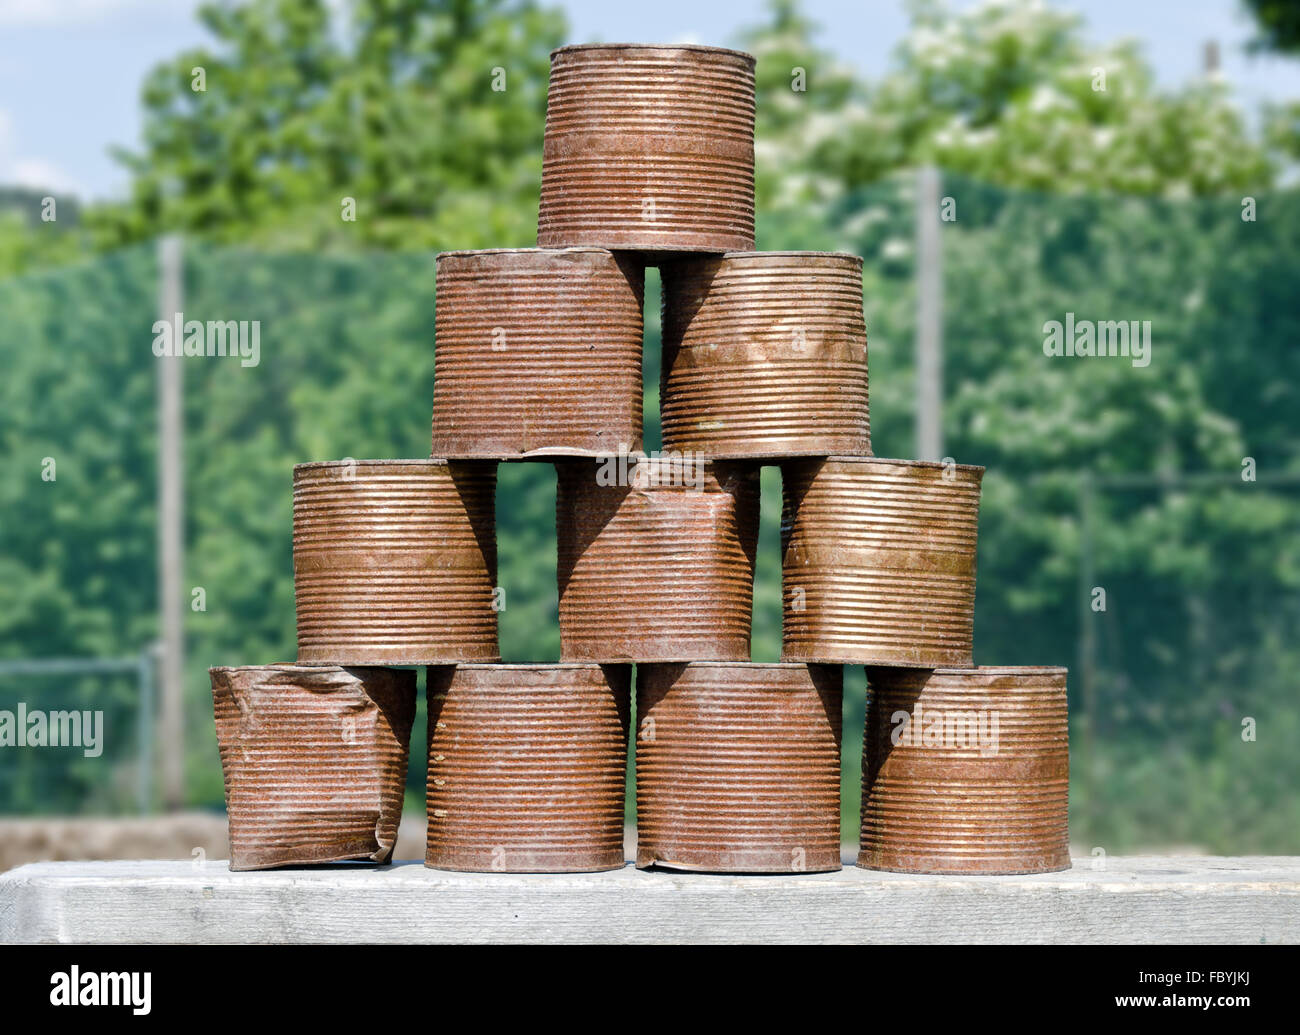 stack of rusty tins Stock Photo